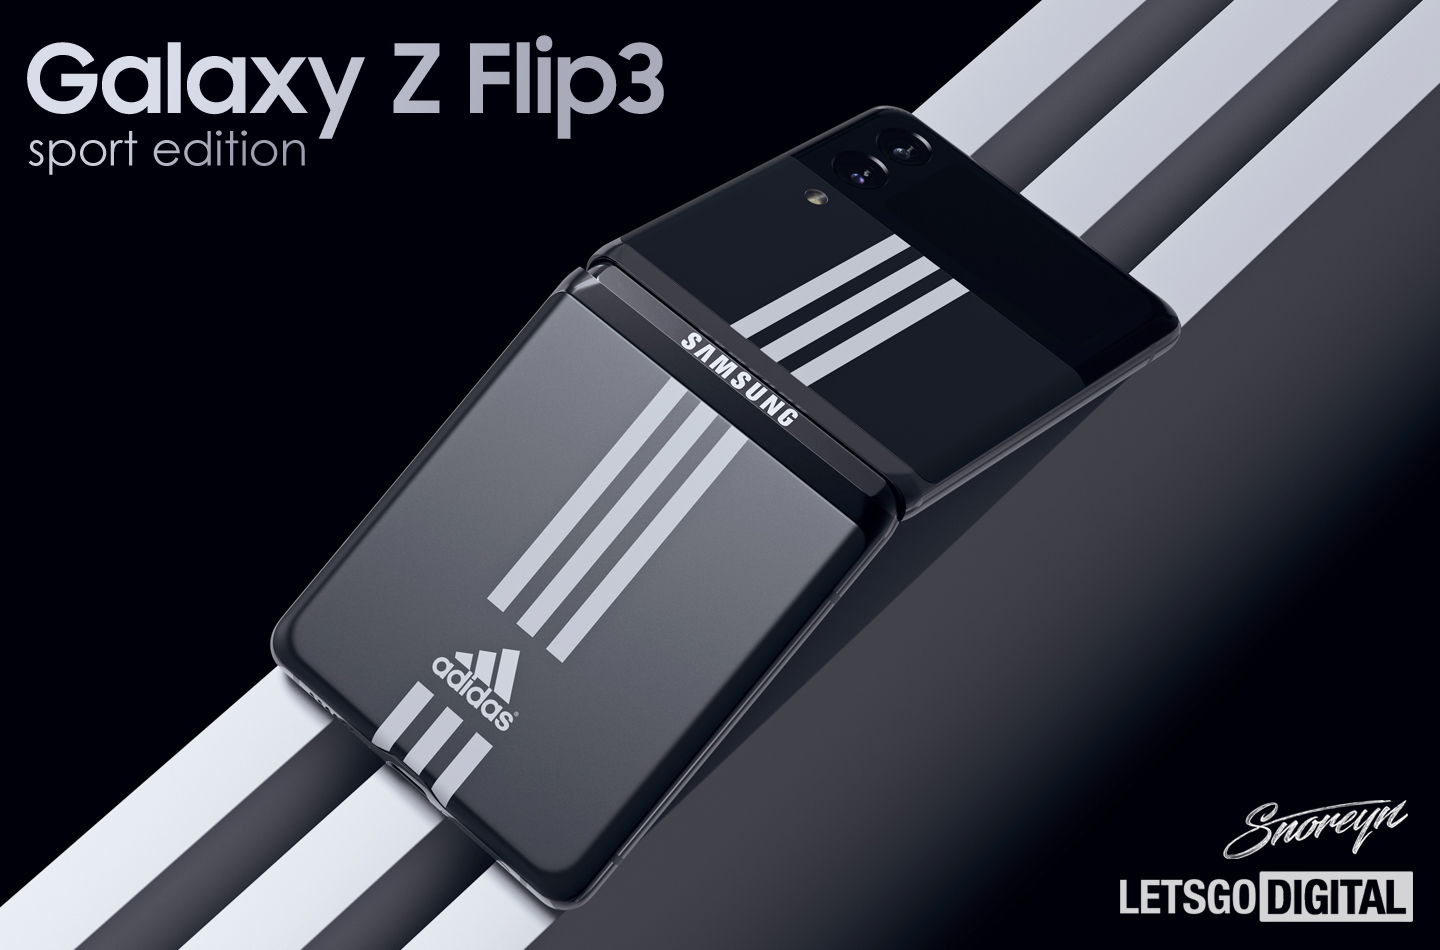 Quejar Corrección Espere LetsGoDigital - Mark Peters on Twitter: "Samsung Galaxy Z Flip 3 Adidas  Sport Edition👟 https://t.co/M3lCLPTusy Adidas recently sued Thom Browne  because of the use of three stripes. Do you see the resemblance?